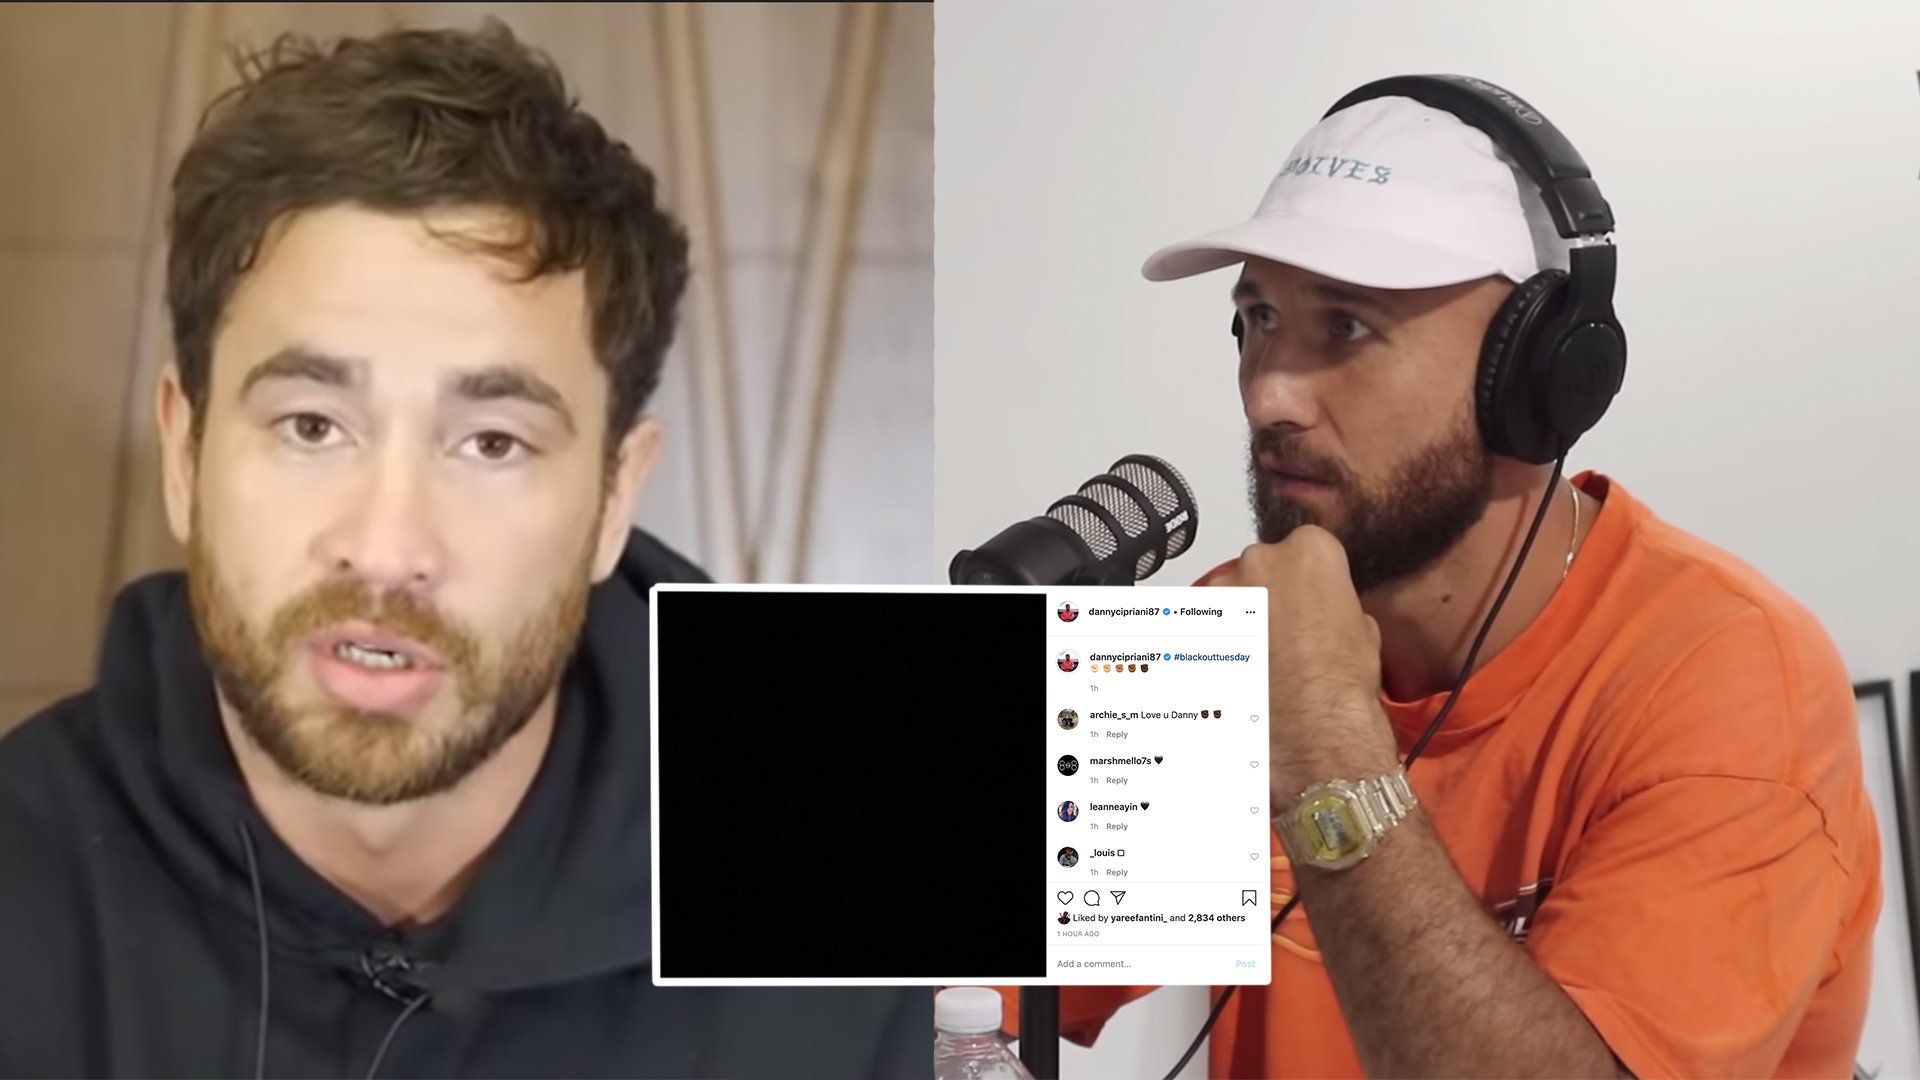 Danny Cipriani and Quade cooper post powerful messages as part of social media blackout